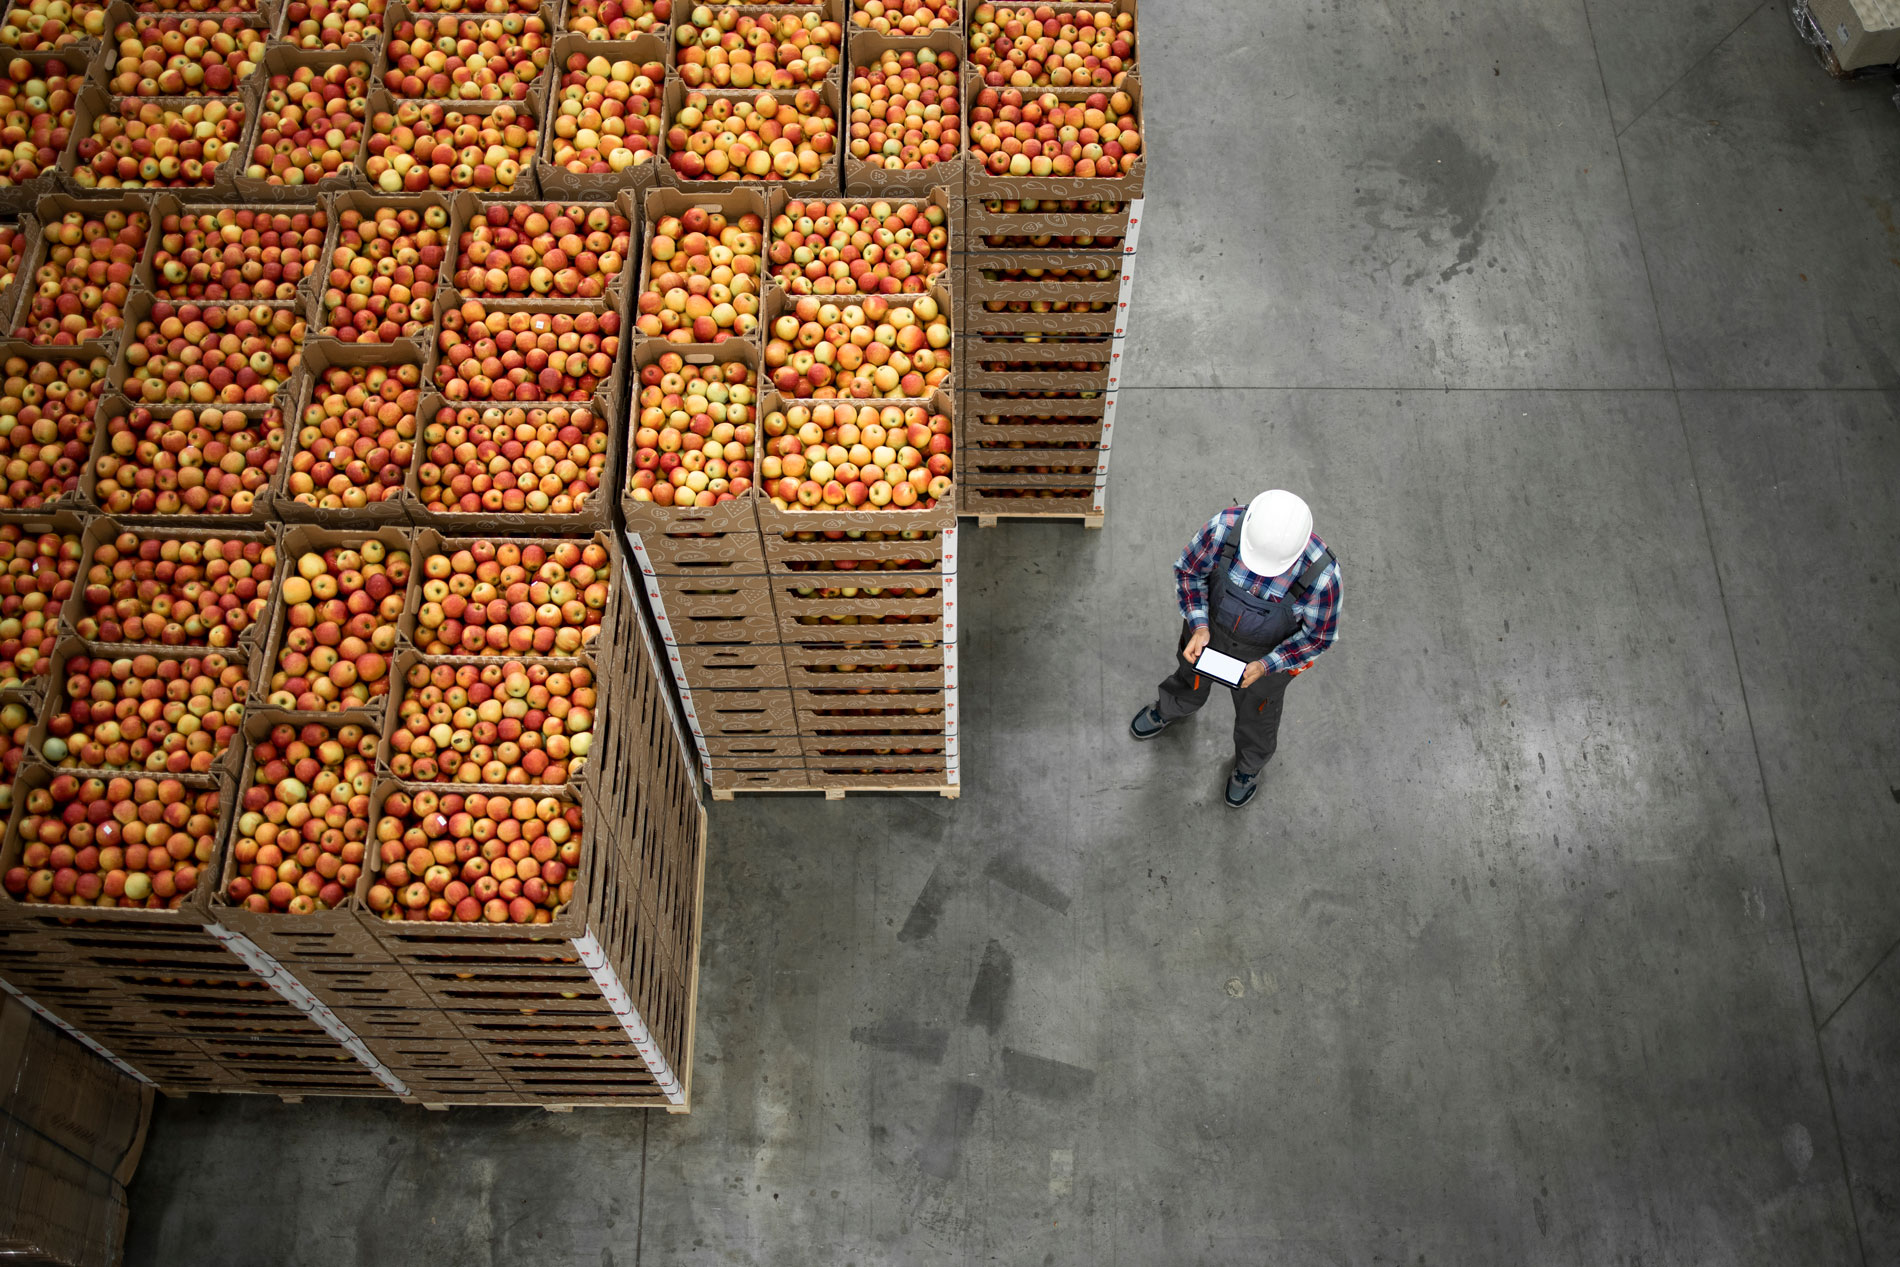 International fruit trade on a global scale